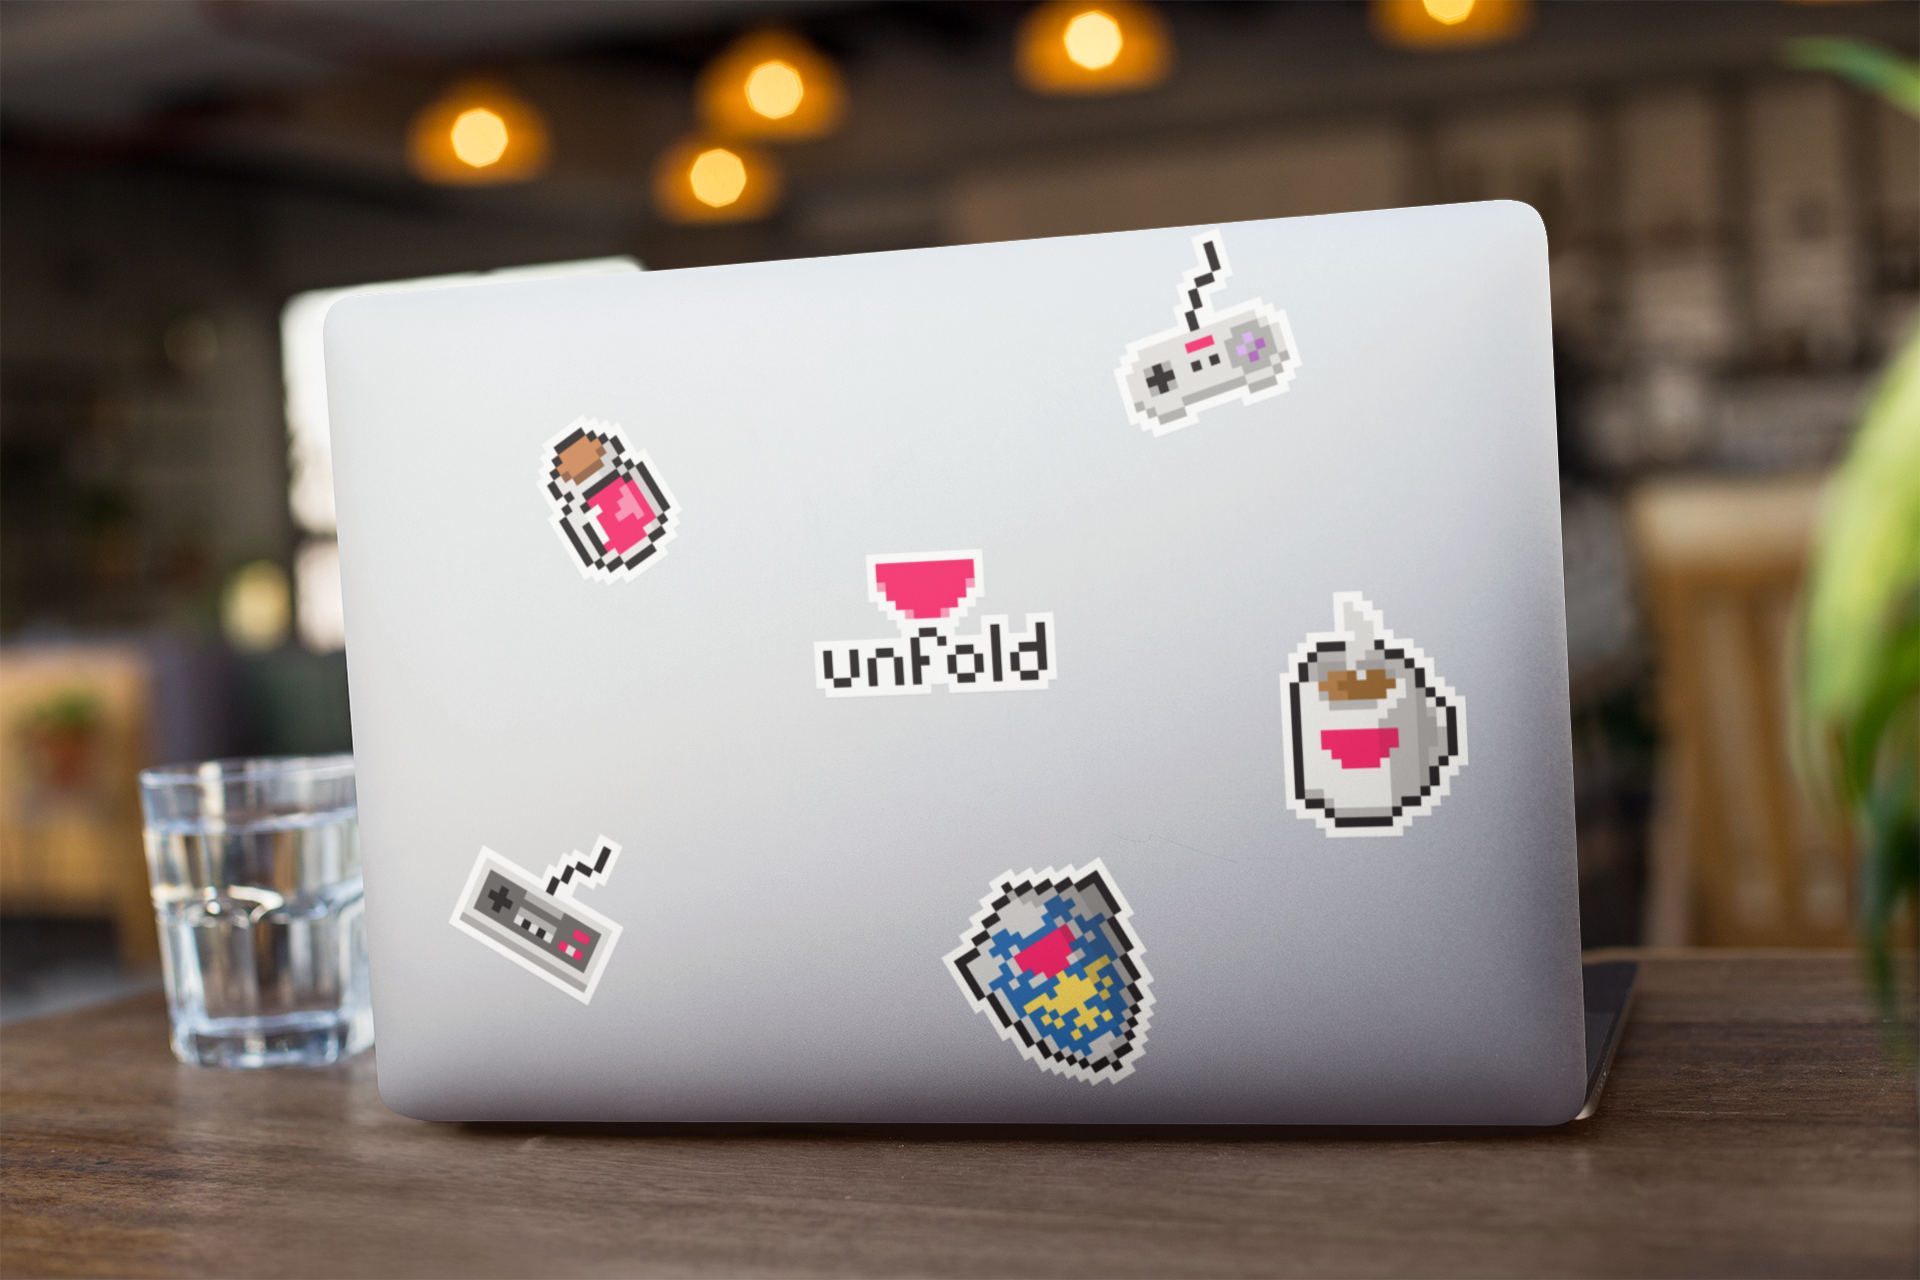 Download Dribbble - laptop-sticker-mockup-of-a-computer-on-wooden-table-25214.png by Victor Korchuk